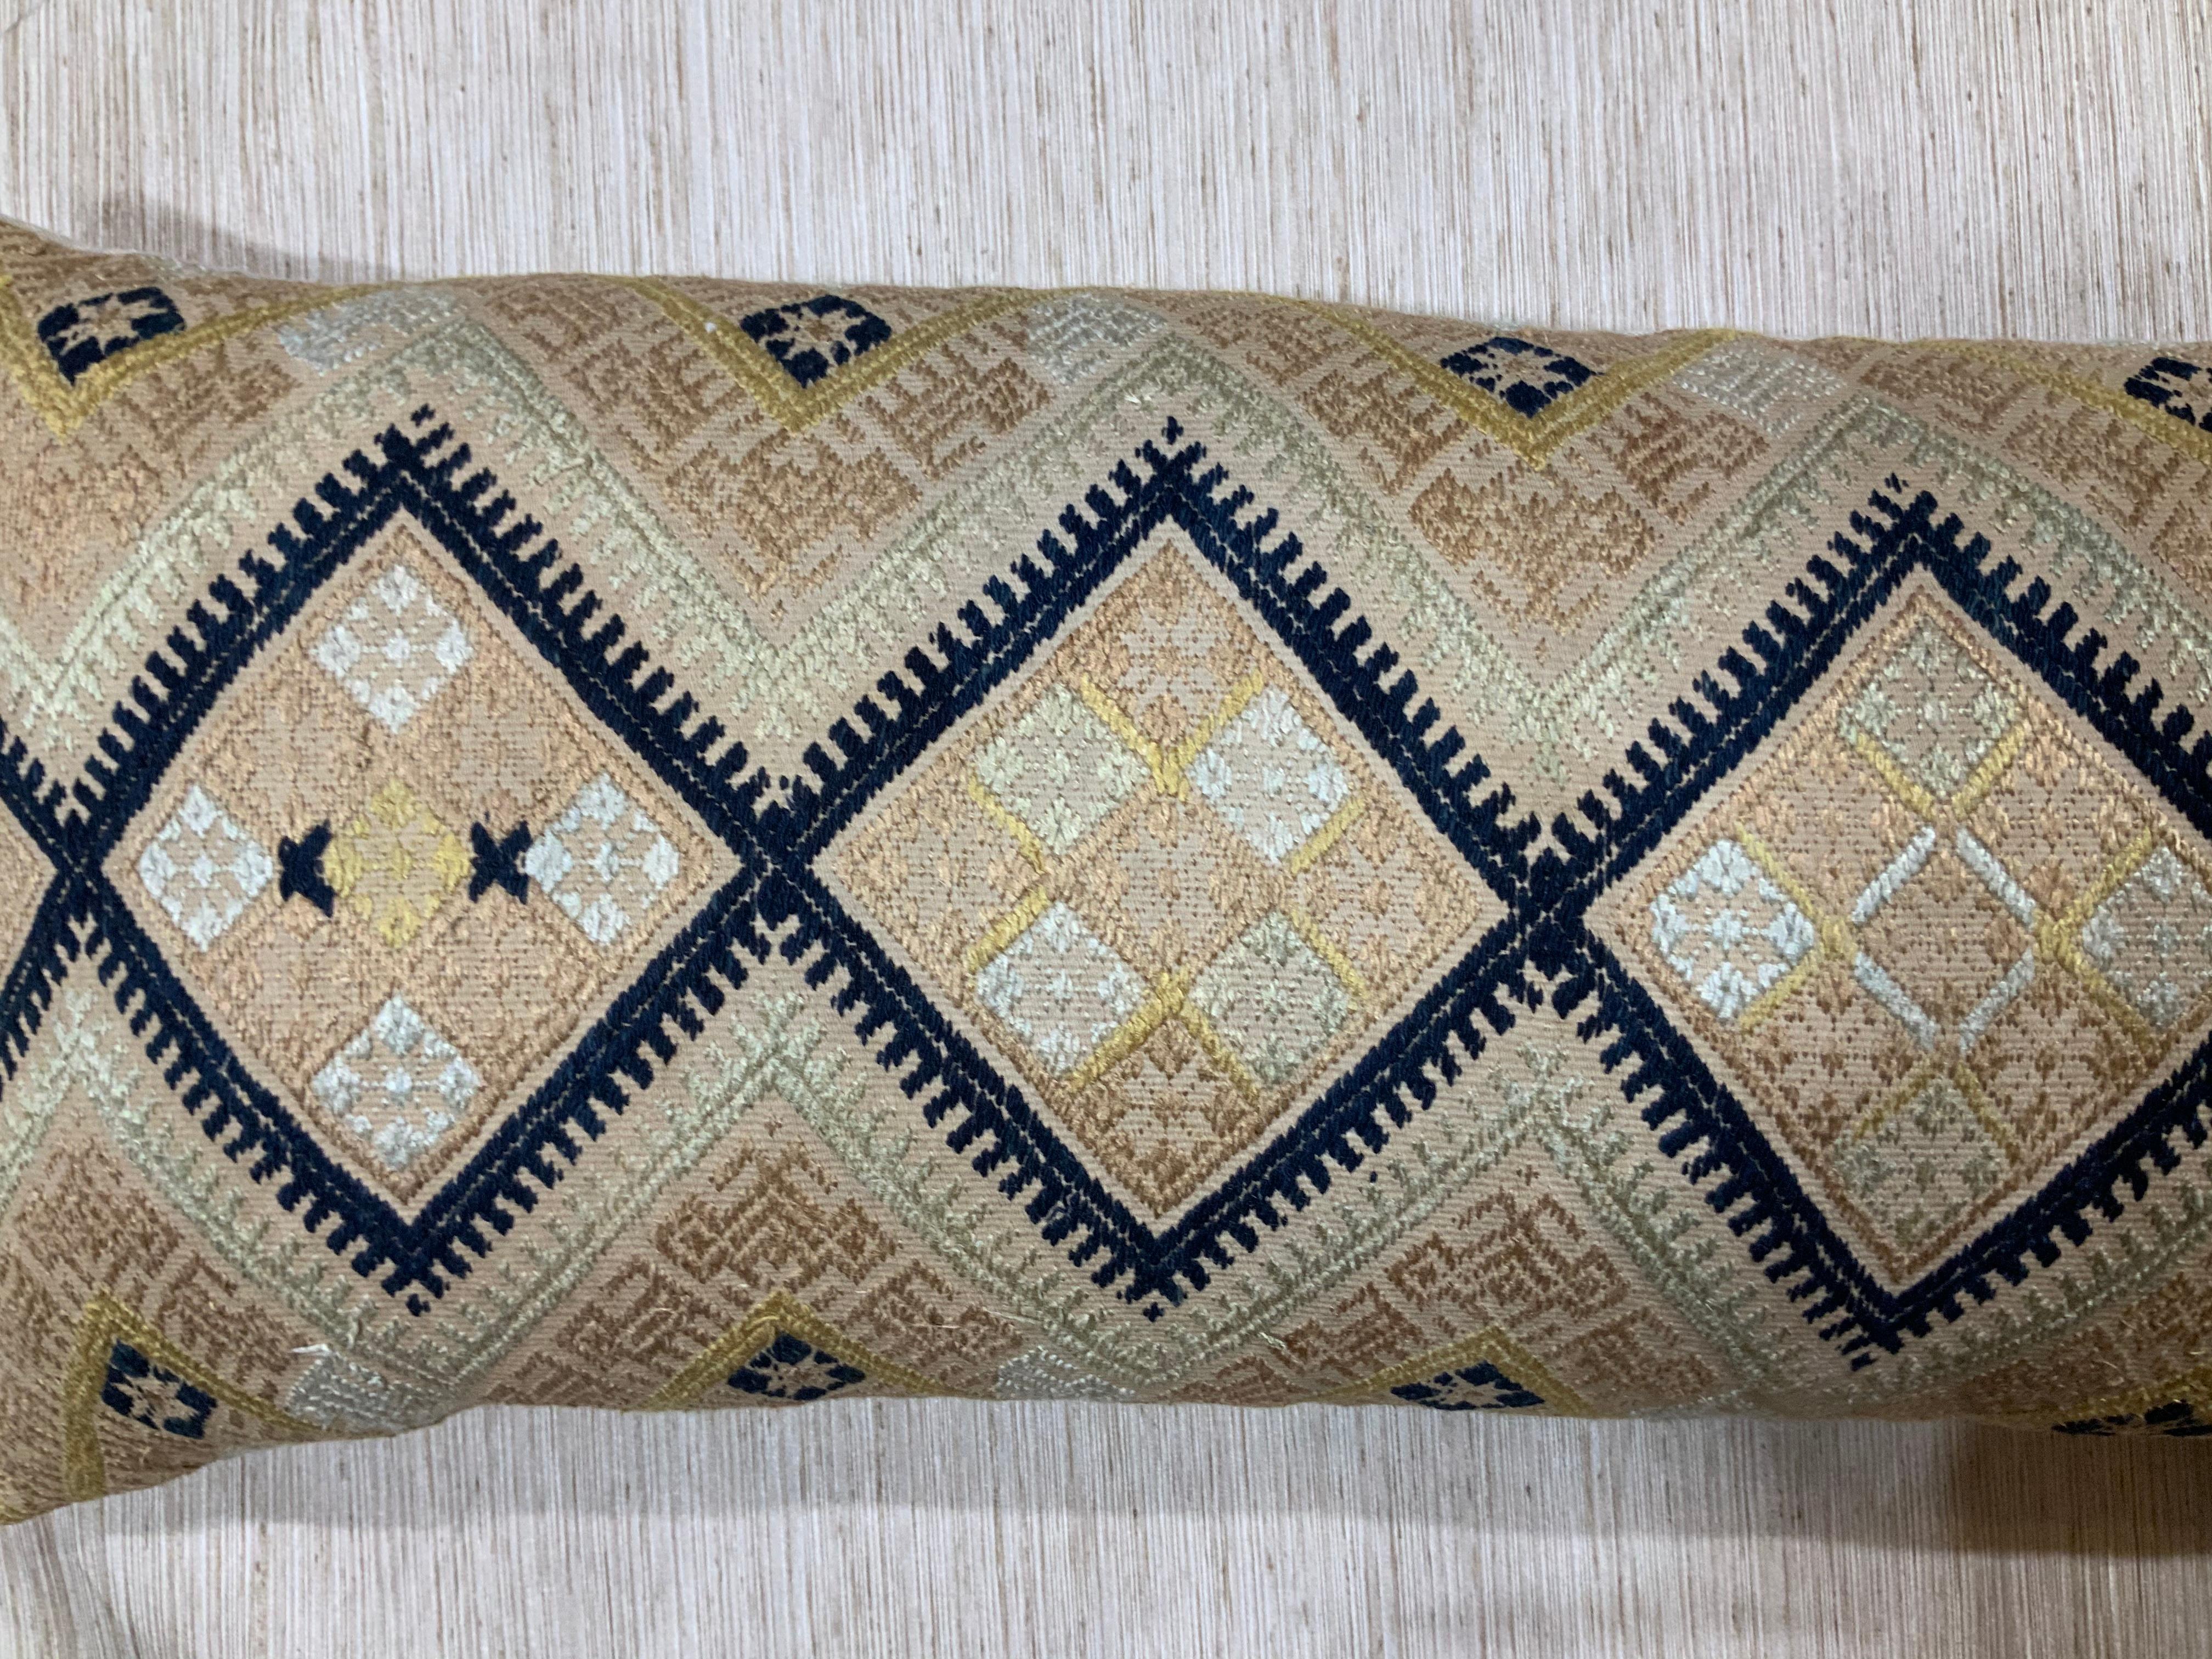 20th Century Vintage Hand Embroidery Suzani Pillows